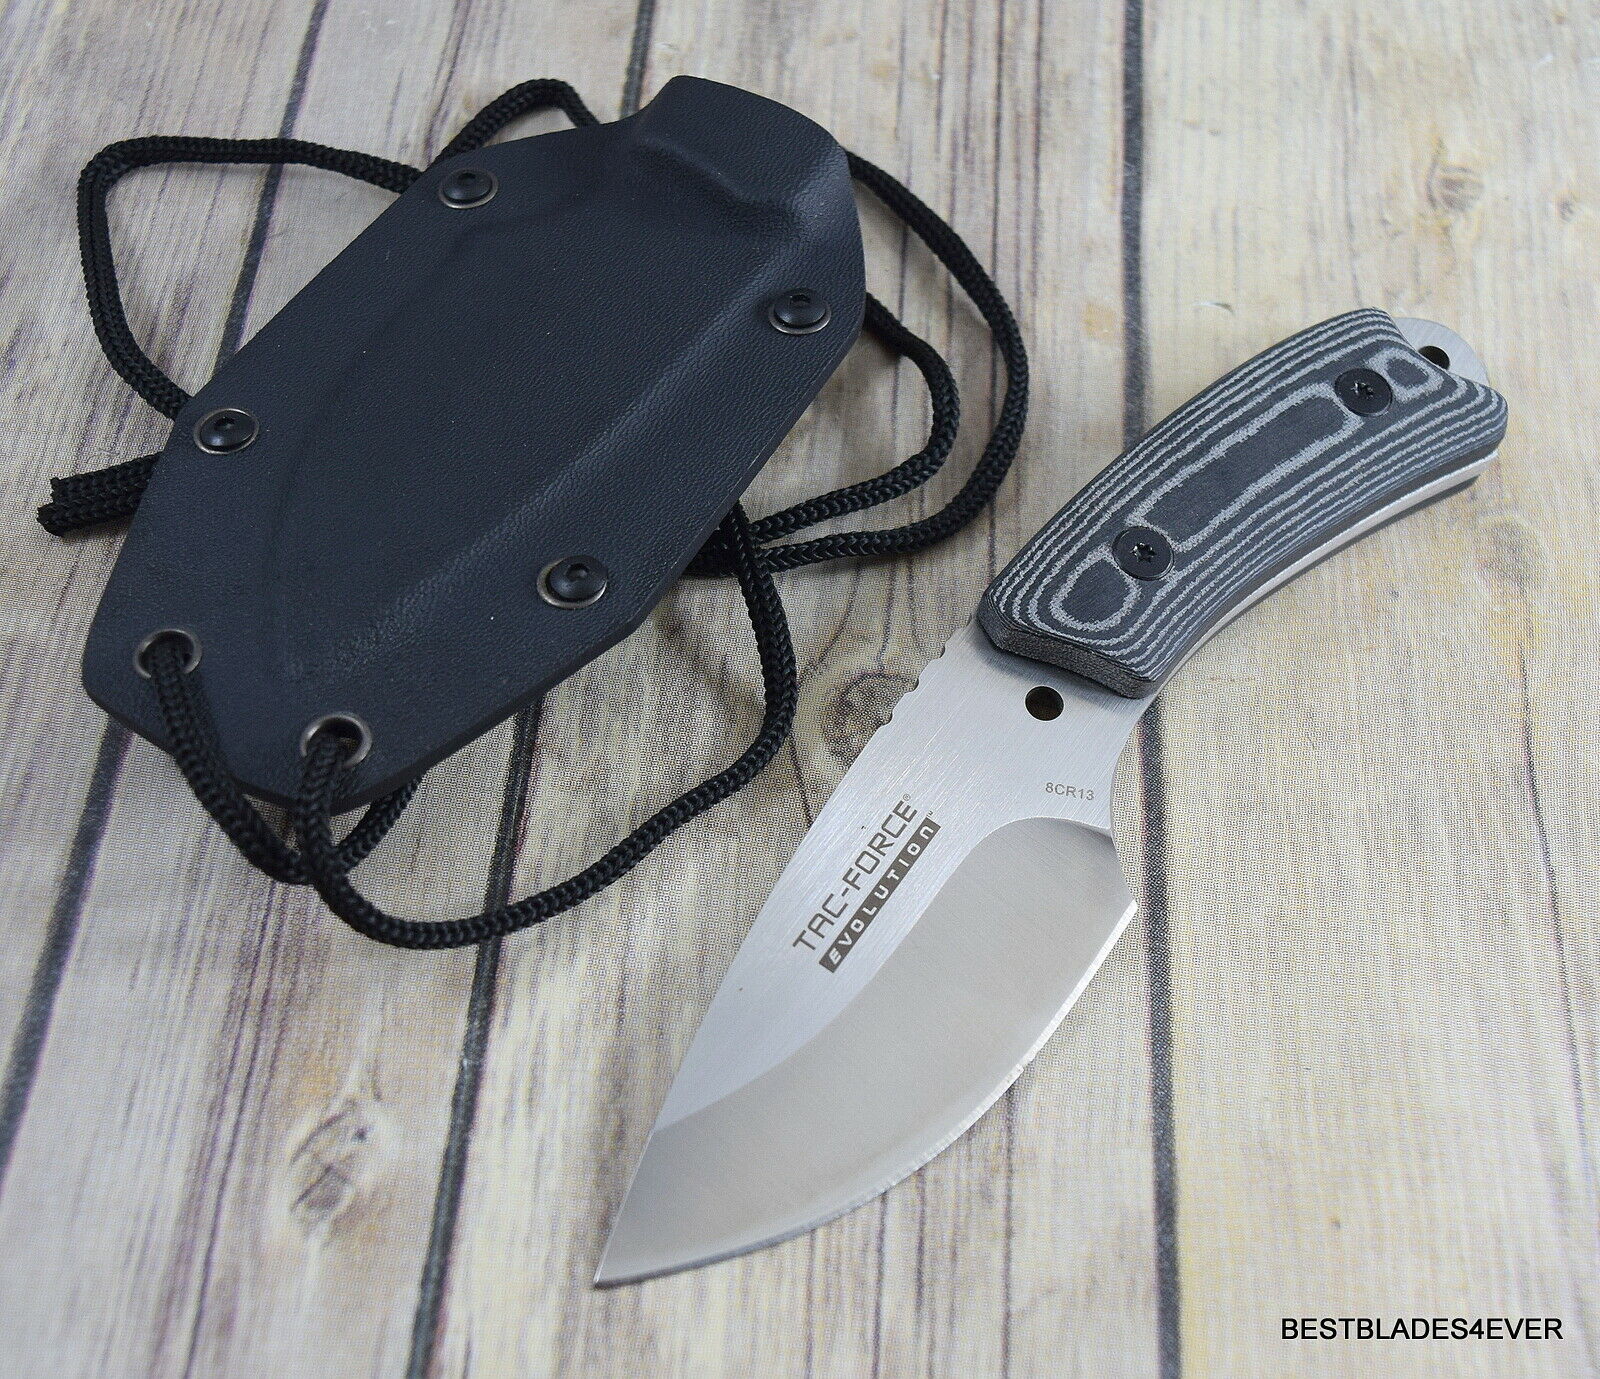 7 INCH TAC-FORCE EVOLUTION SMALL FIXED BLADE NECK/BOOT KNIFE KYDEX SHEATH WITH BELT CLIP